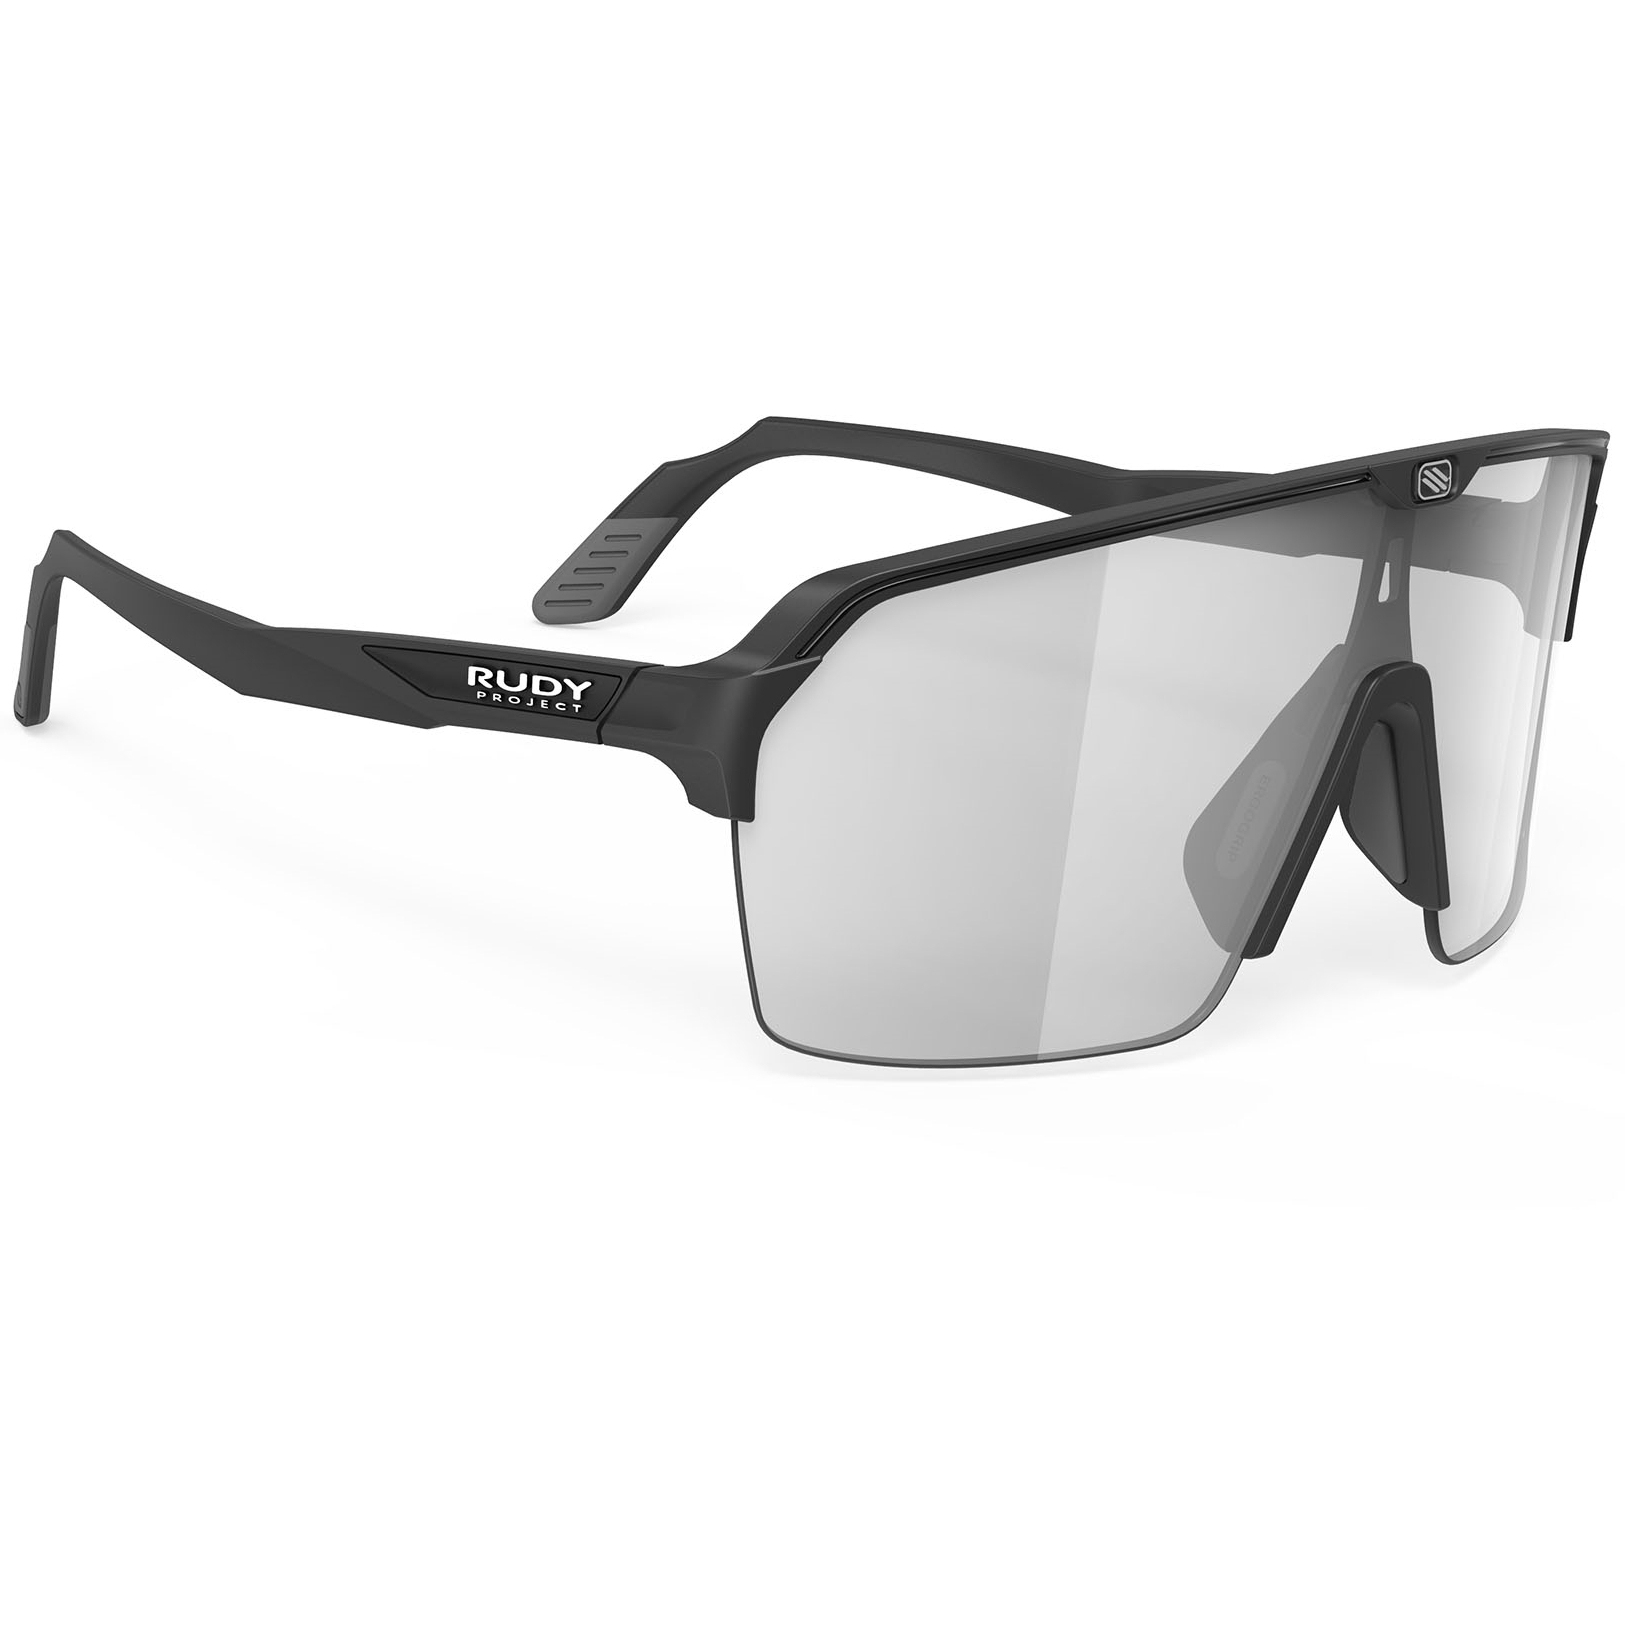 Picture of Rudy Project Spinshield Air Photochromic Glasses - Black Matte/ImpactX 2 Laser Black